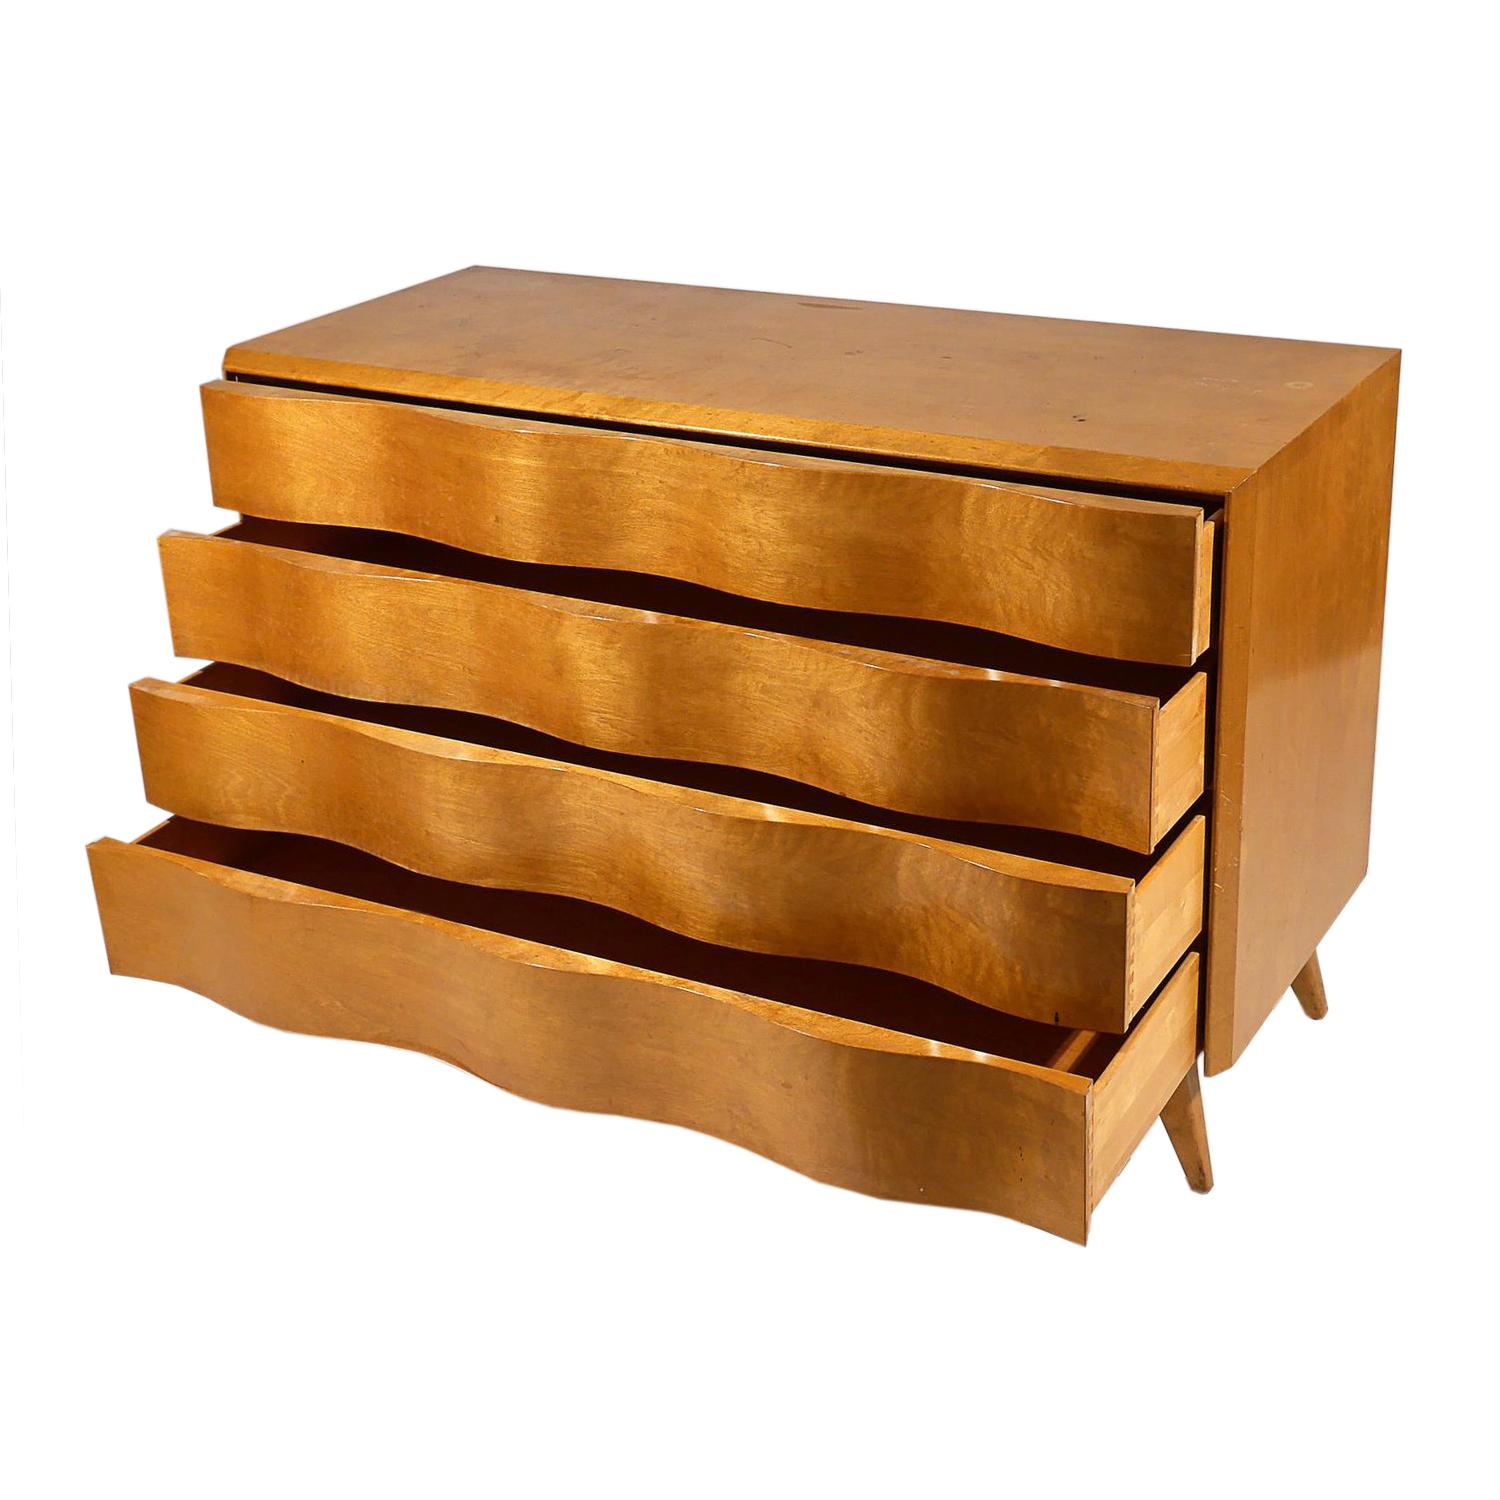 Hand-Carved 20th Century Swedish Birchwood Wave Front Chest of Drawers by Edmond J. Spence